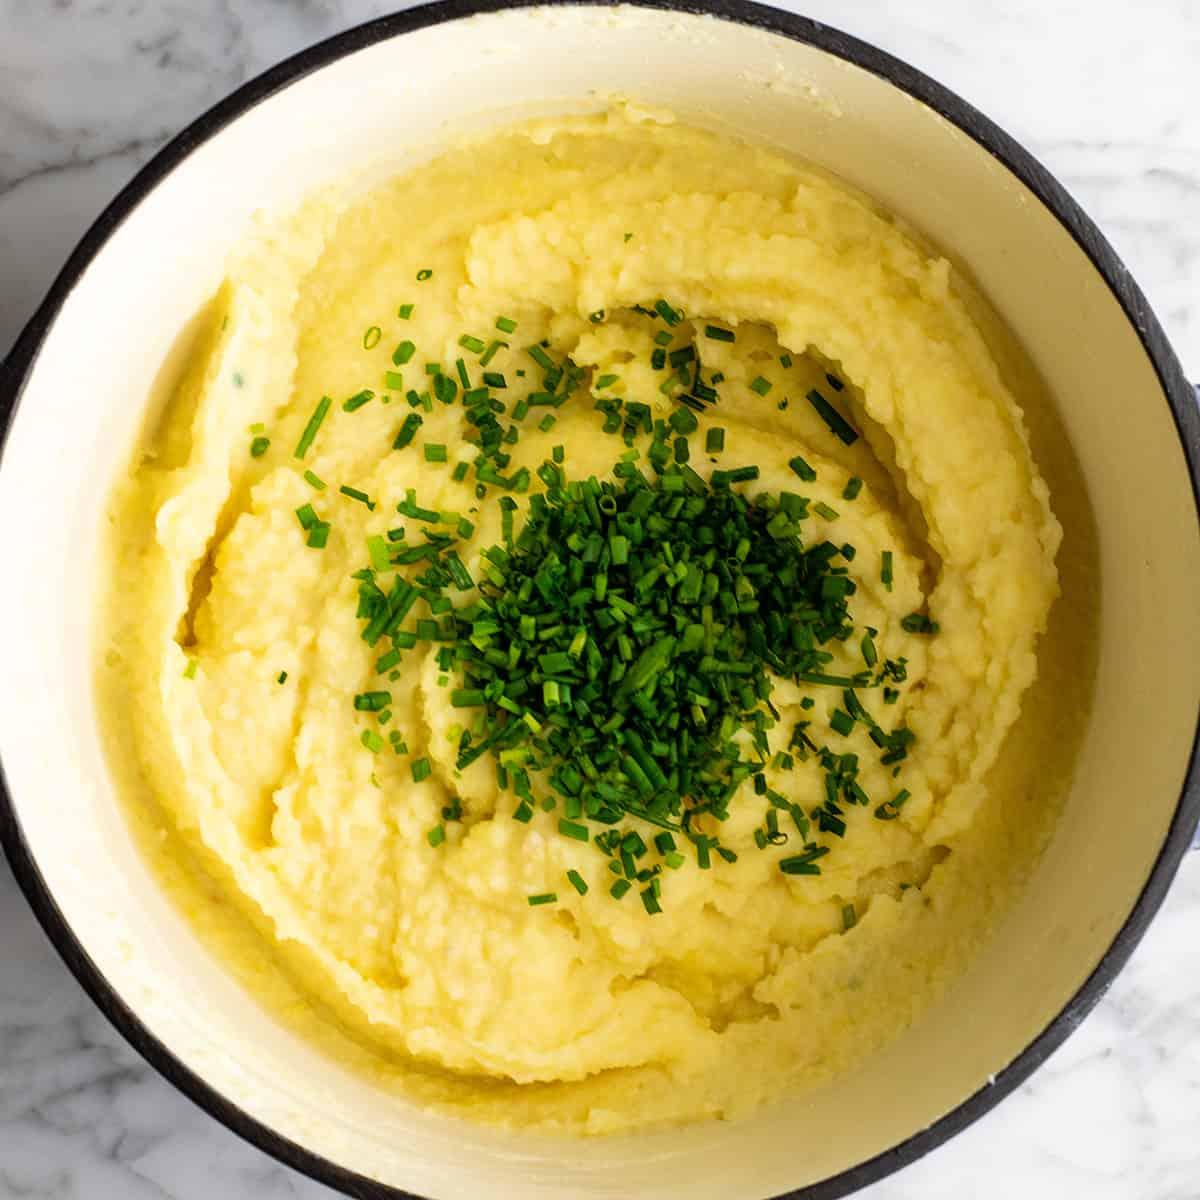 how to make mashed potatoes - adding chives